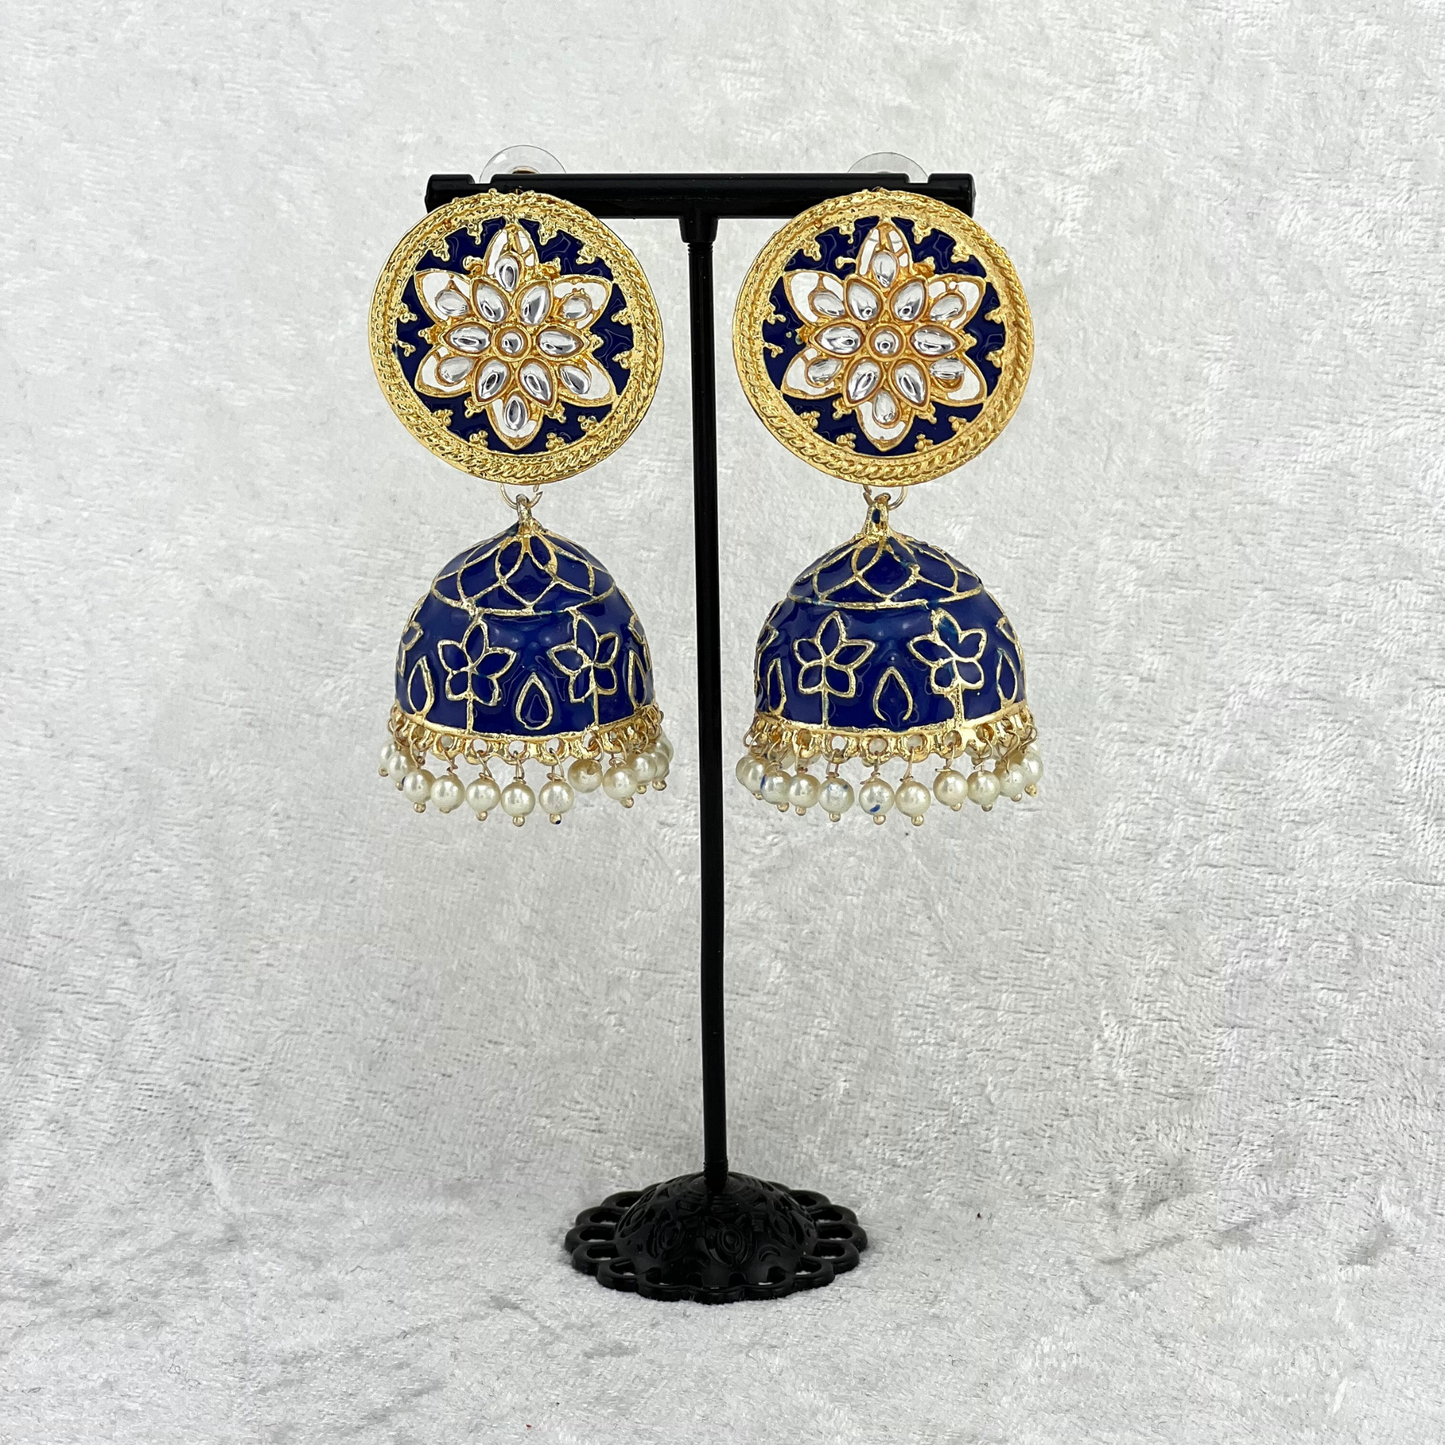 Jhumka Earrings in royal blue colour High quality hand painted earrings with pearls. Latest 2022 fashion, prefect for Indian weddings, parties & special occasions.